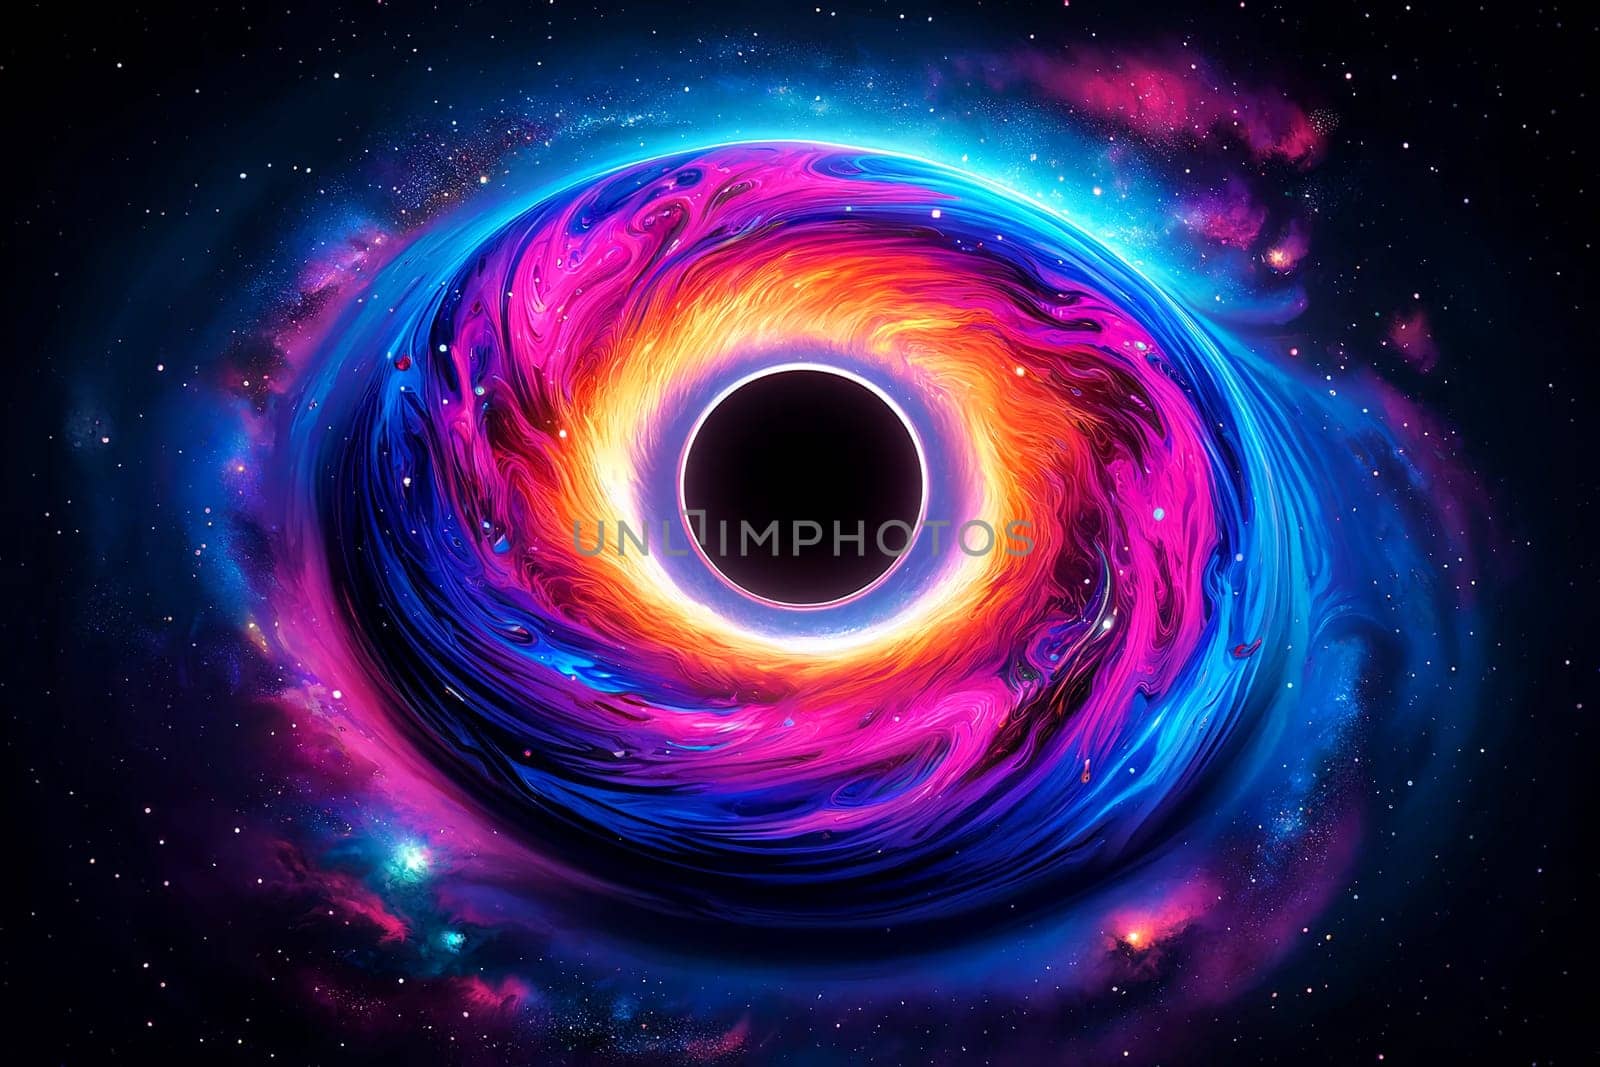 colorful depiction of a black hole with swirling accretion disk in space by Annado